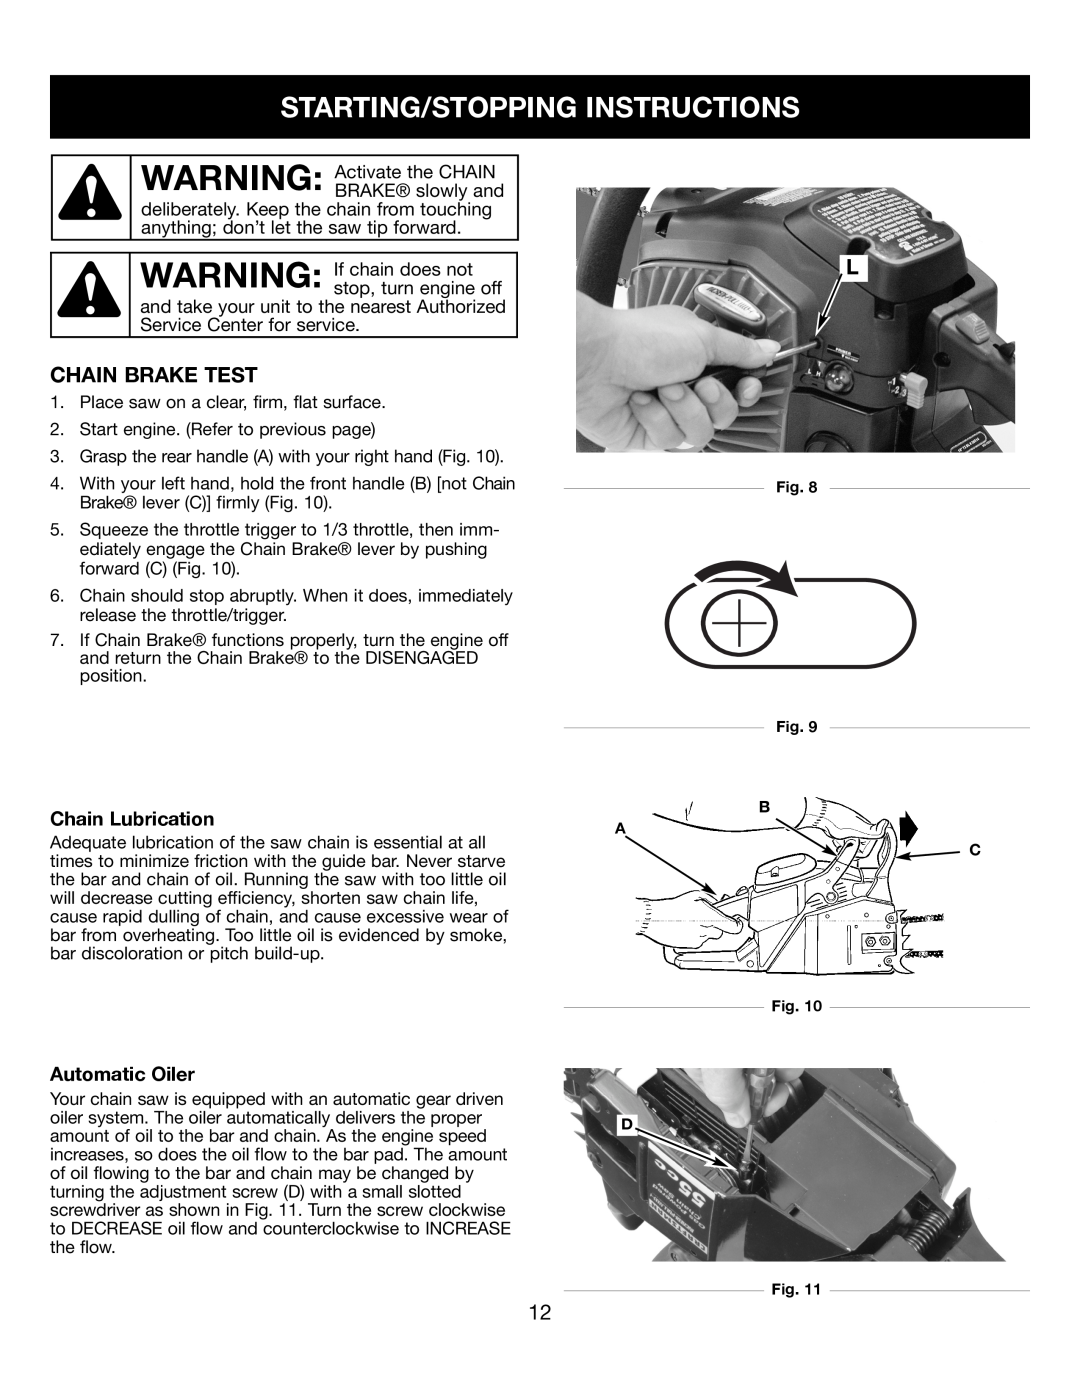 Craftsman 316350840 manual Starting/Stopping Instructions, Chain Brake Test, Chain Lubrication, Automatic Oiler 